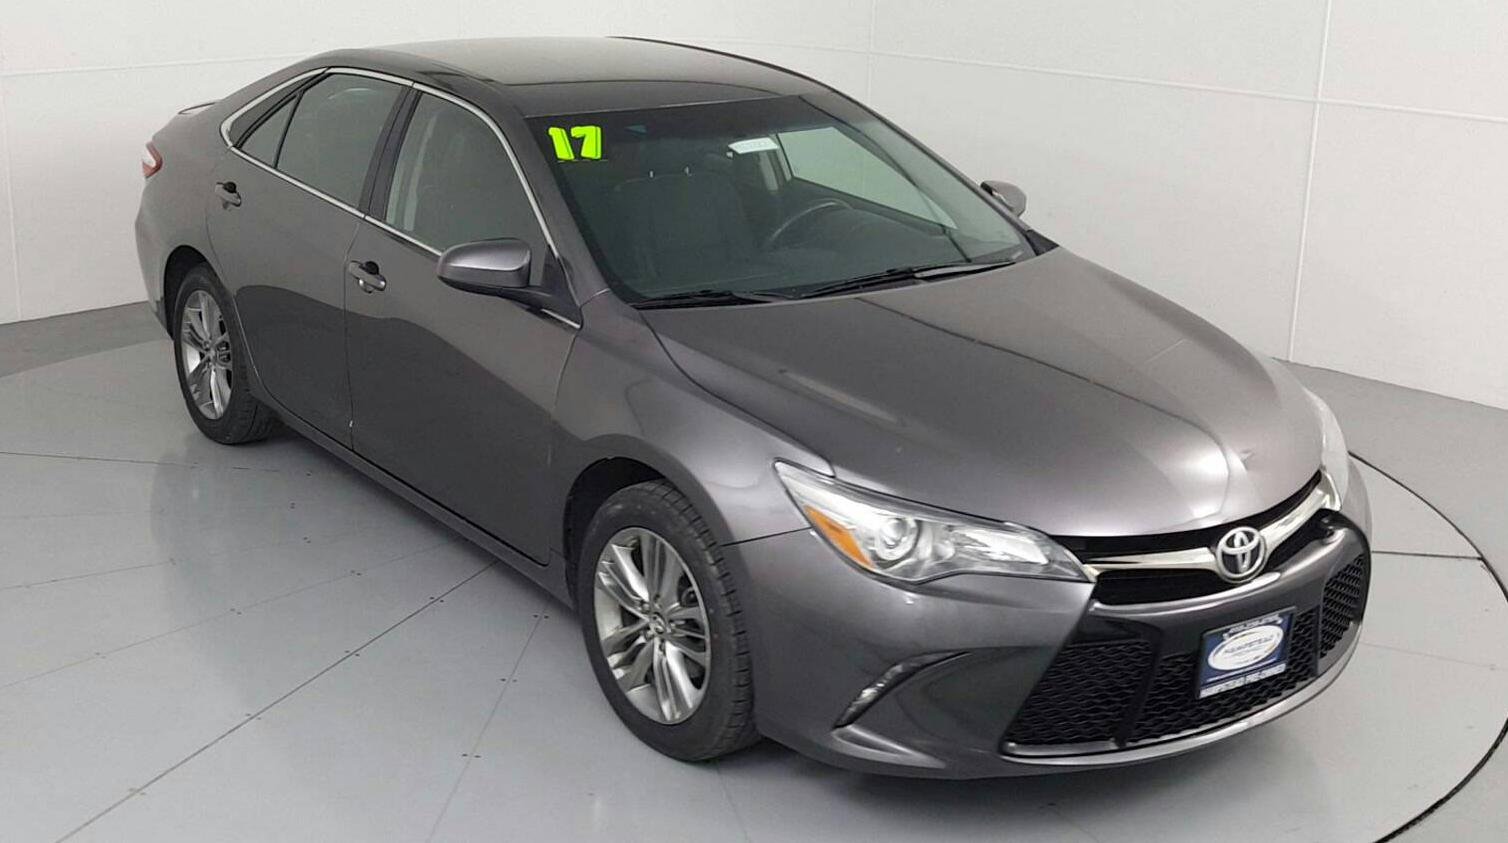 Pre-Owned 2017 TOYOTA Camry SE 4-door Mid-Size Passenger Car in ...